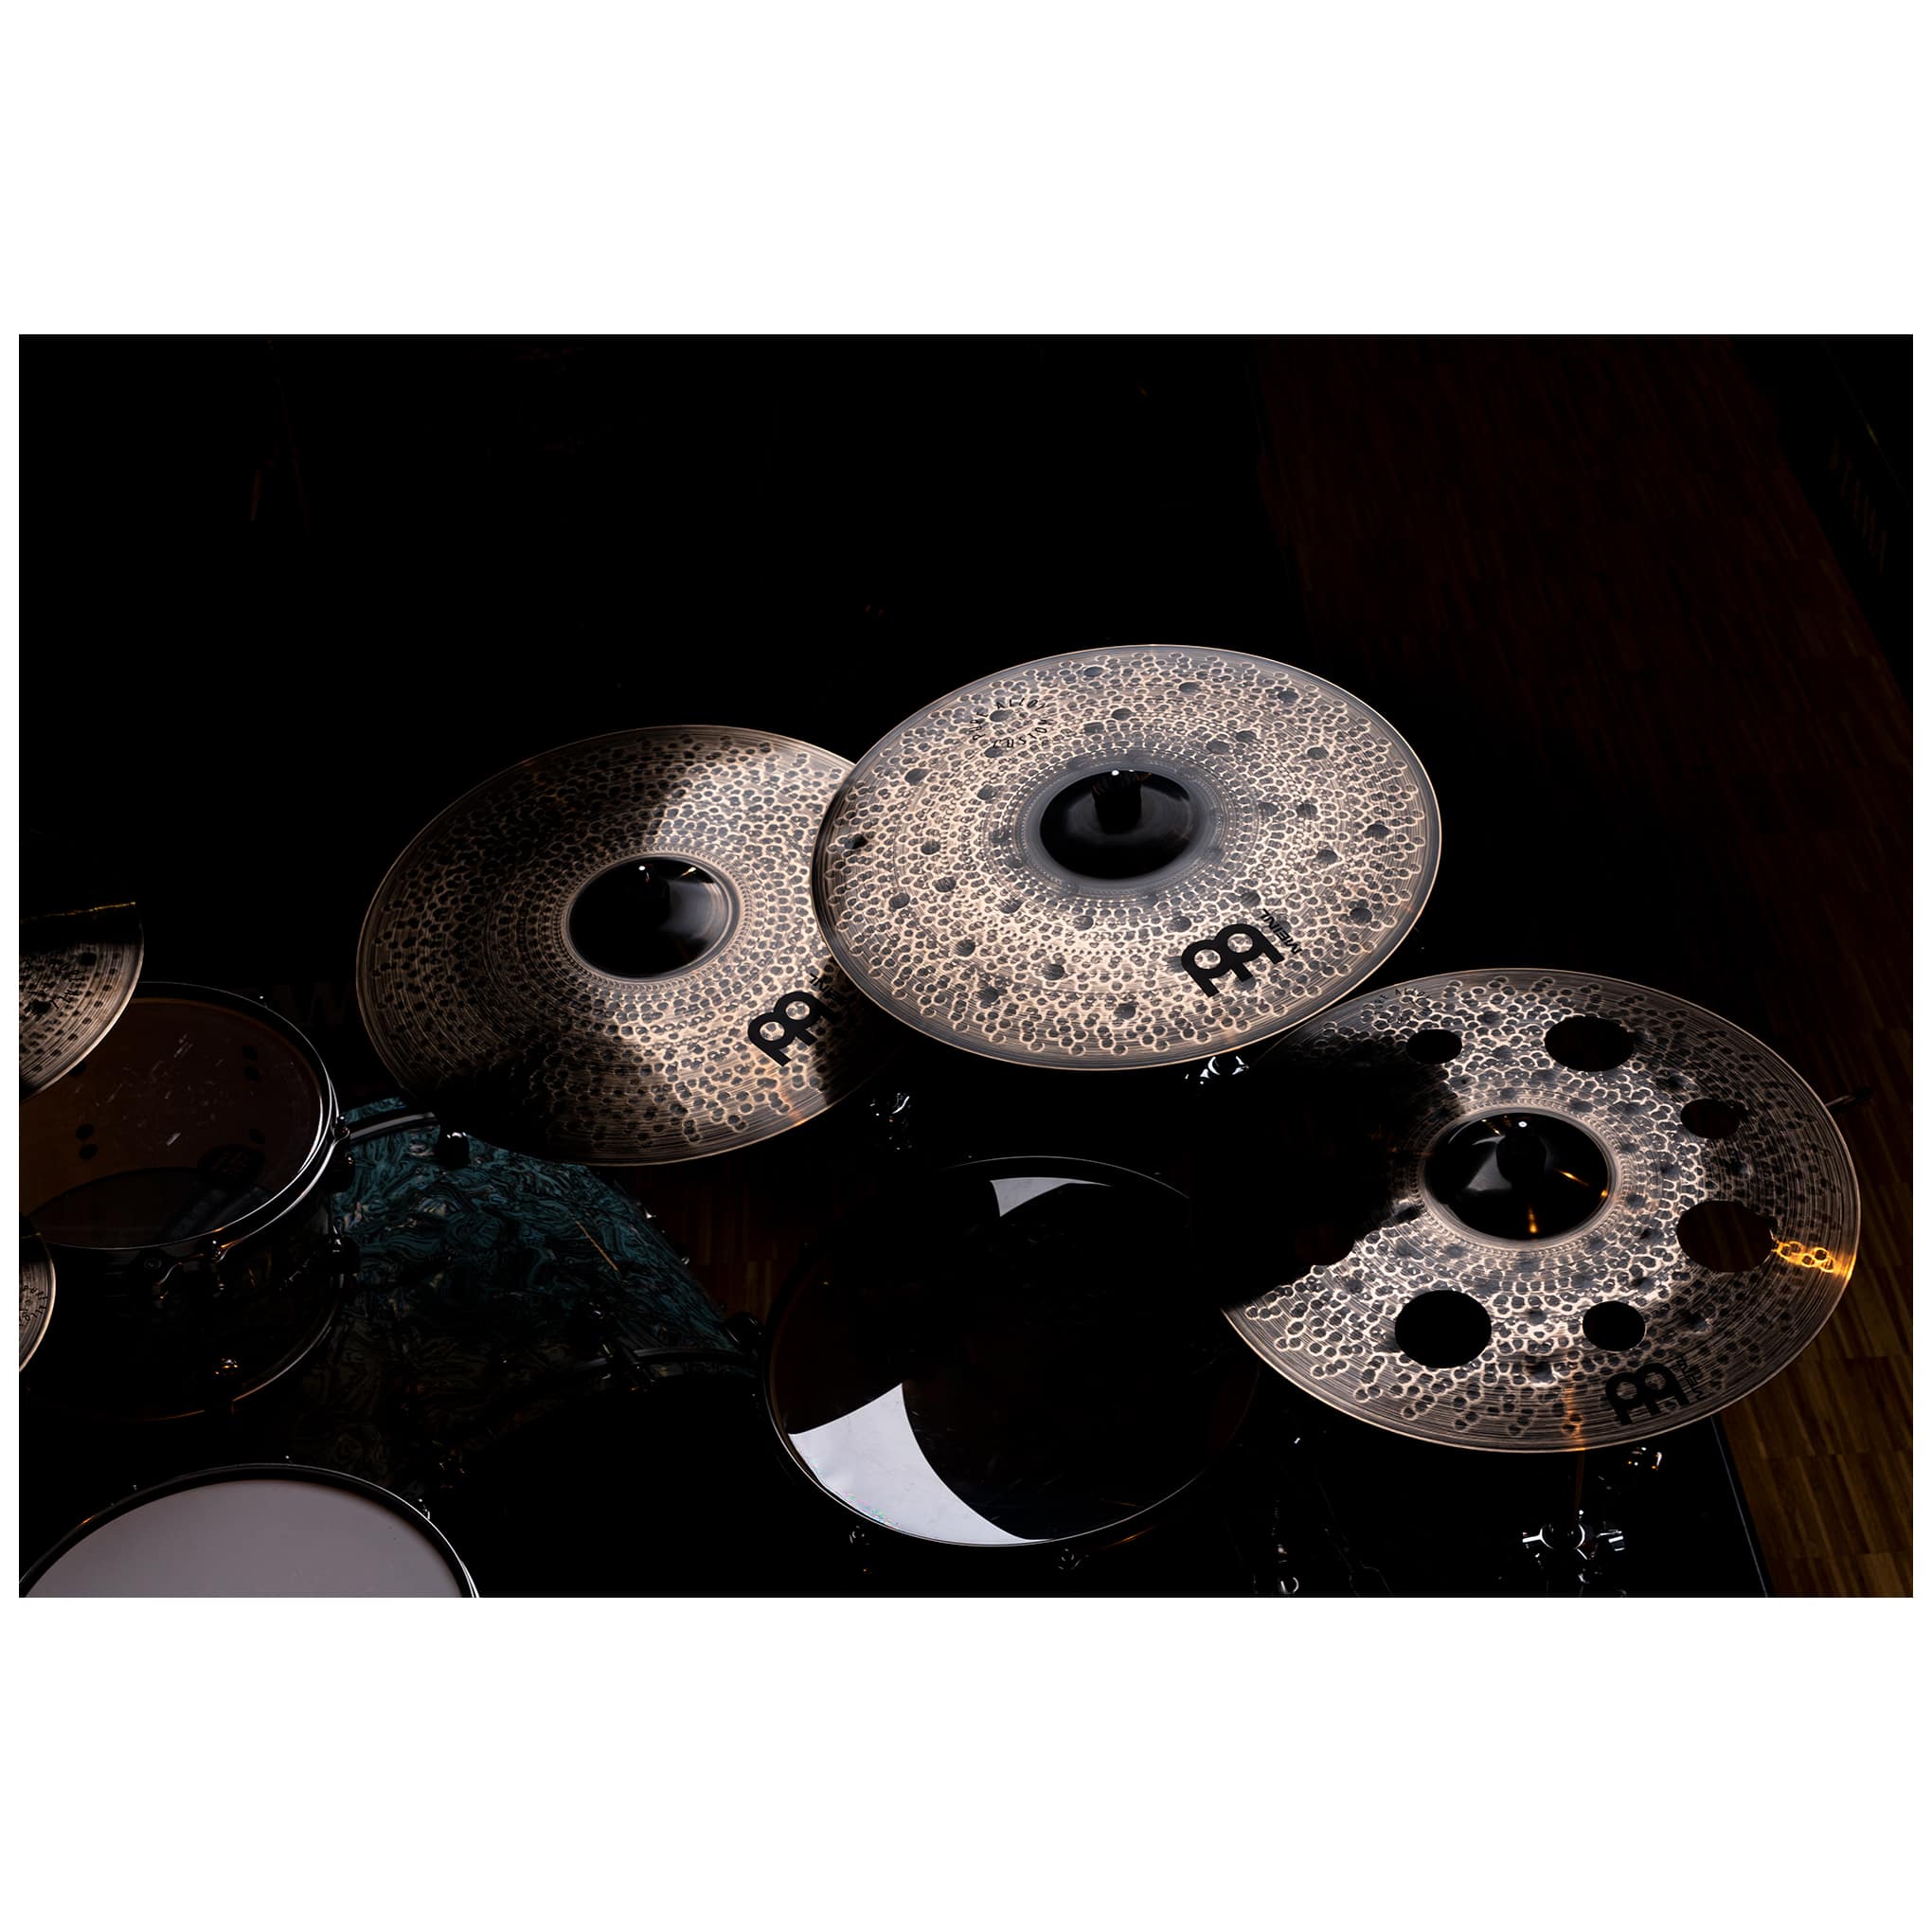 Meinl Cymbals PAC20ETHC - 20" Pure Alloy Custom Extra Thin Hammered Crash 7